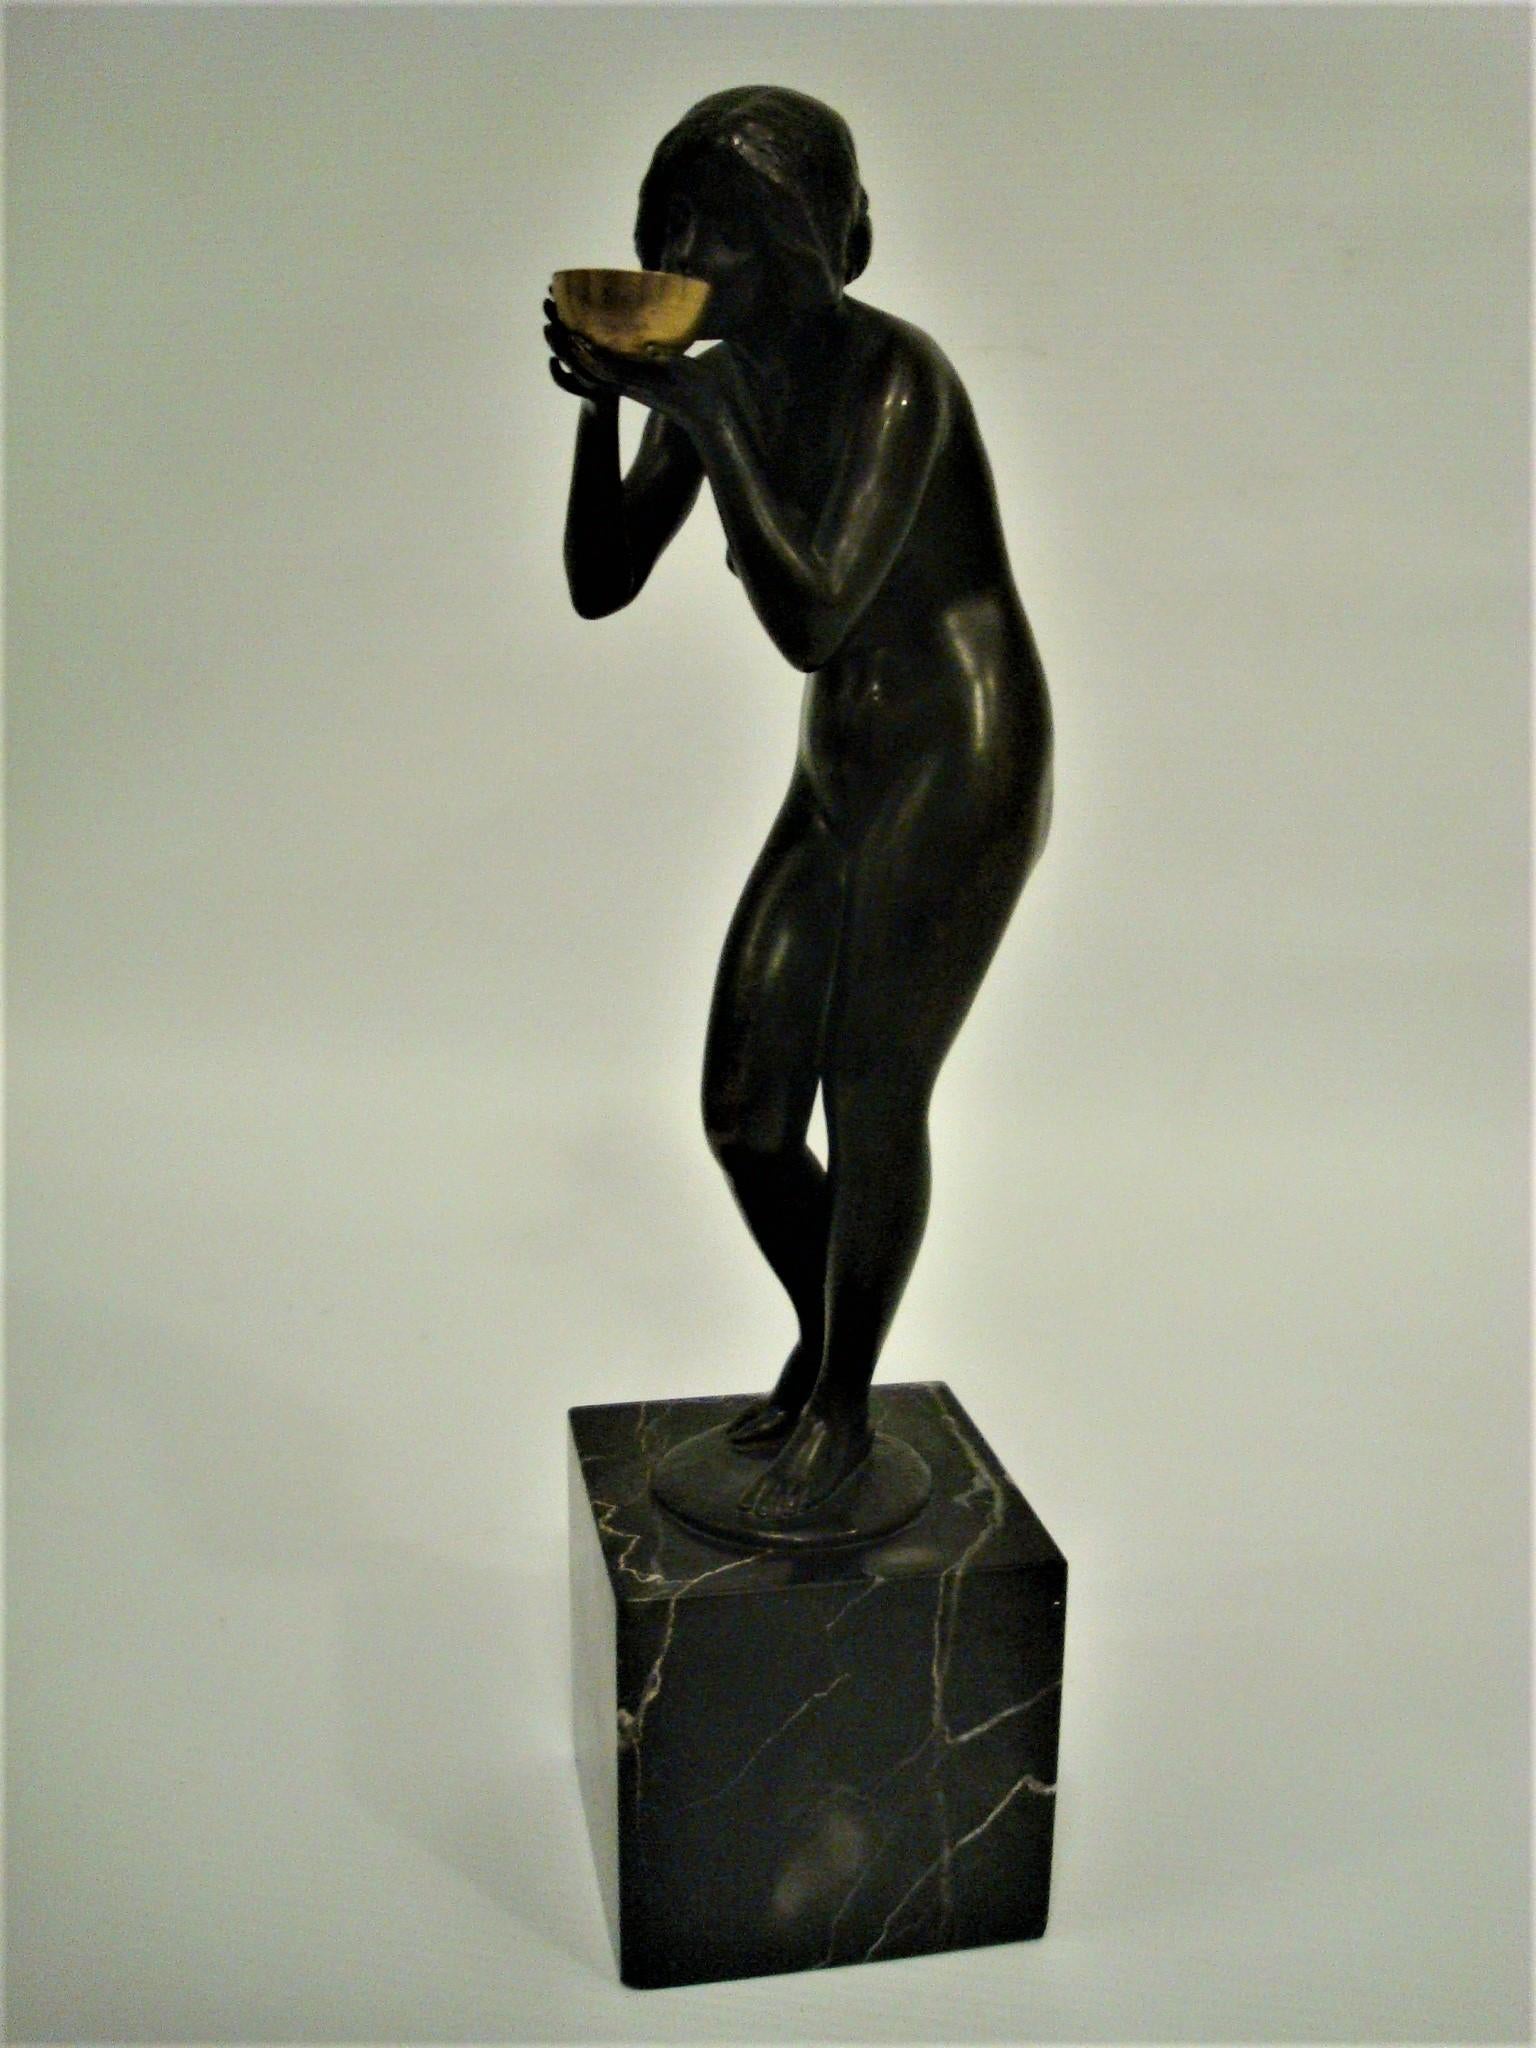 20th Century Art Deco Bronze Sculpture a Nude Lady Drinking from a Cup Victor Heinri Seifert 